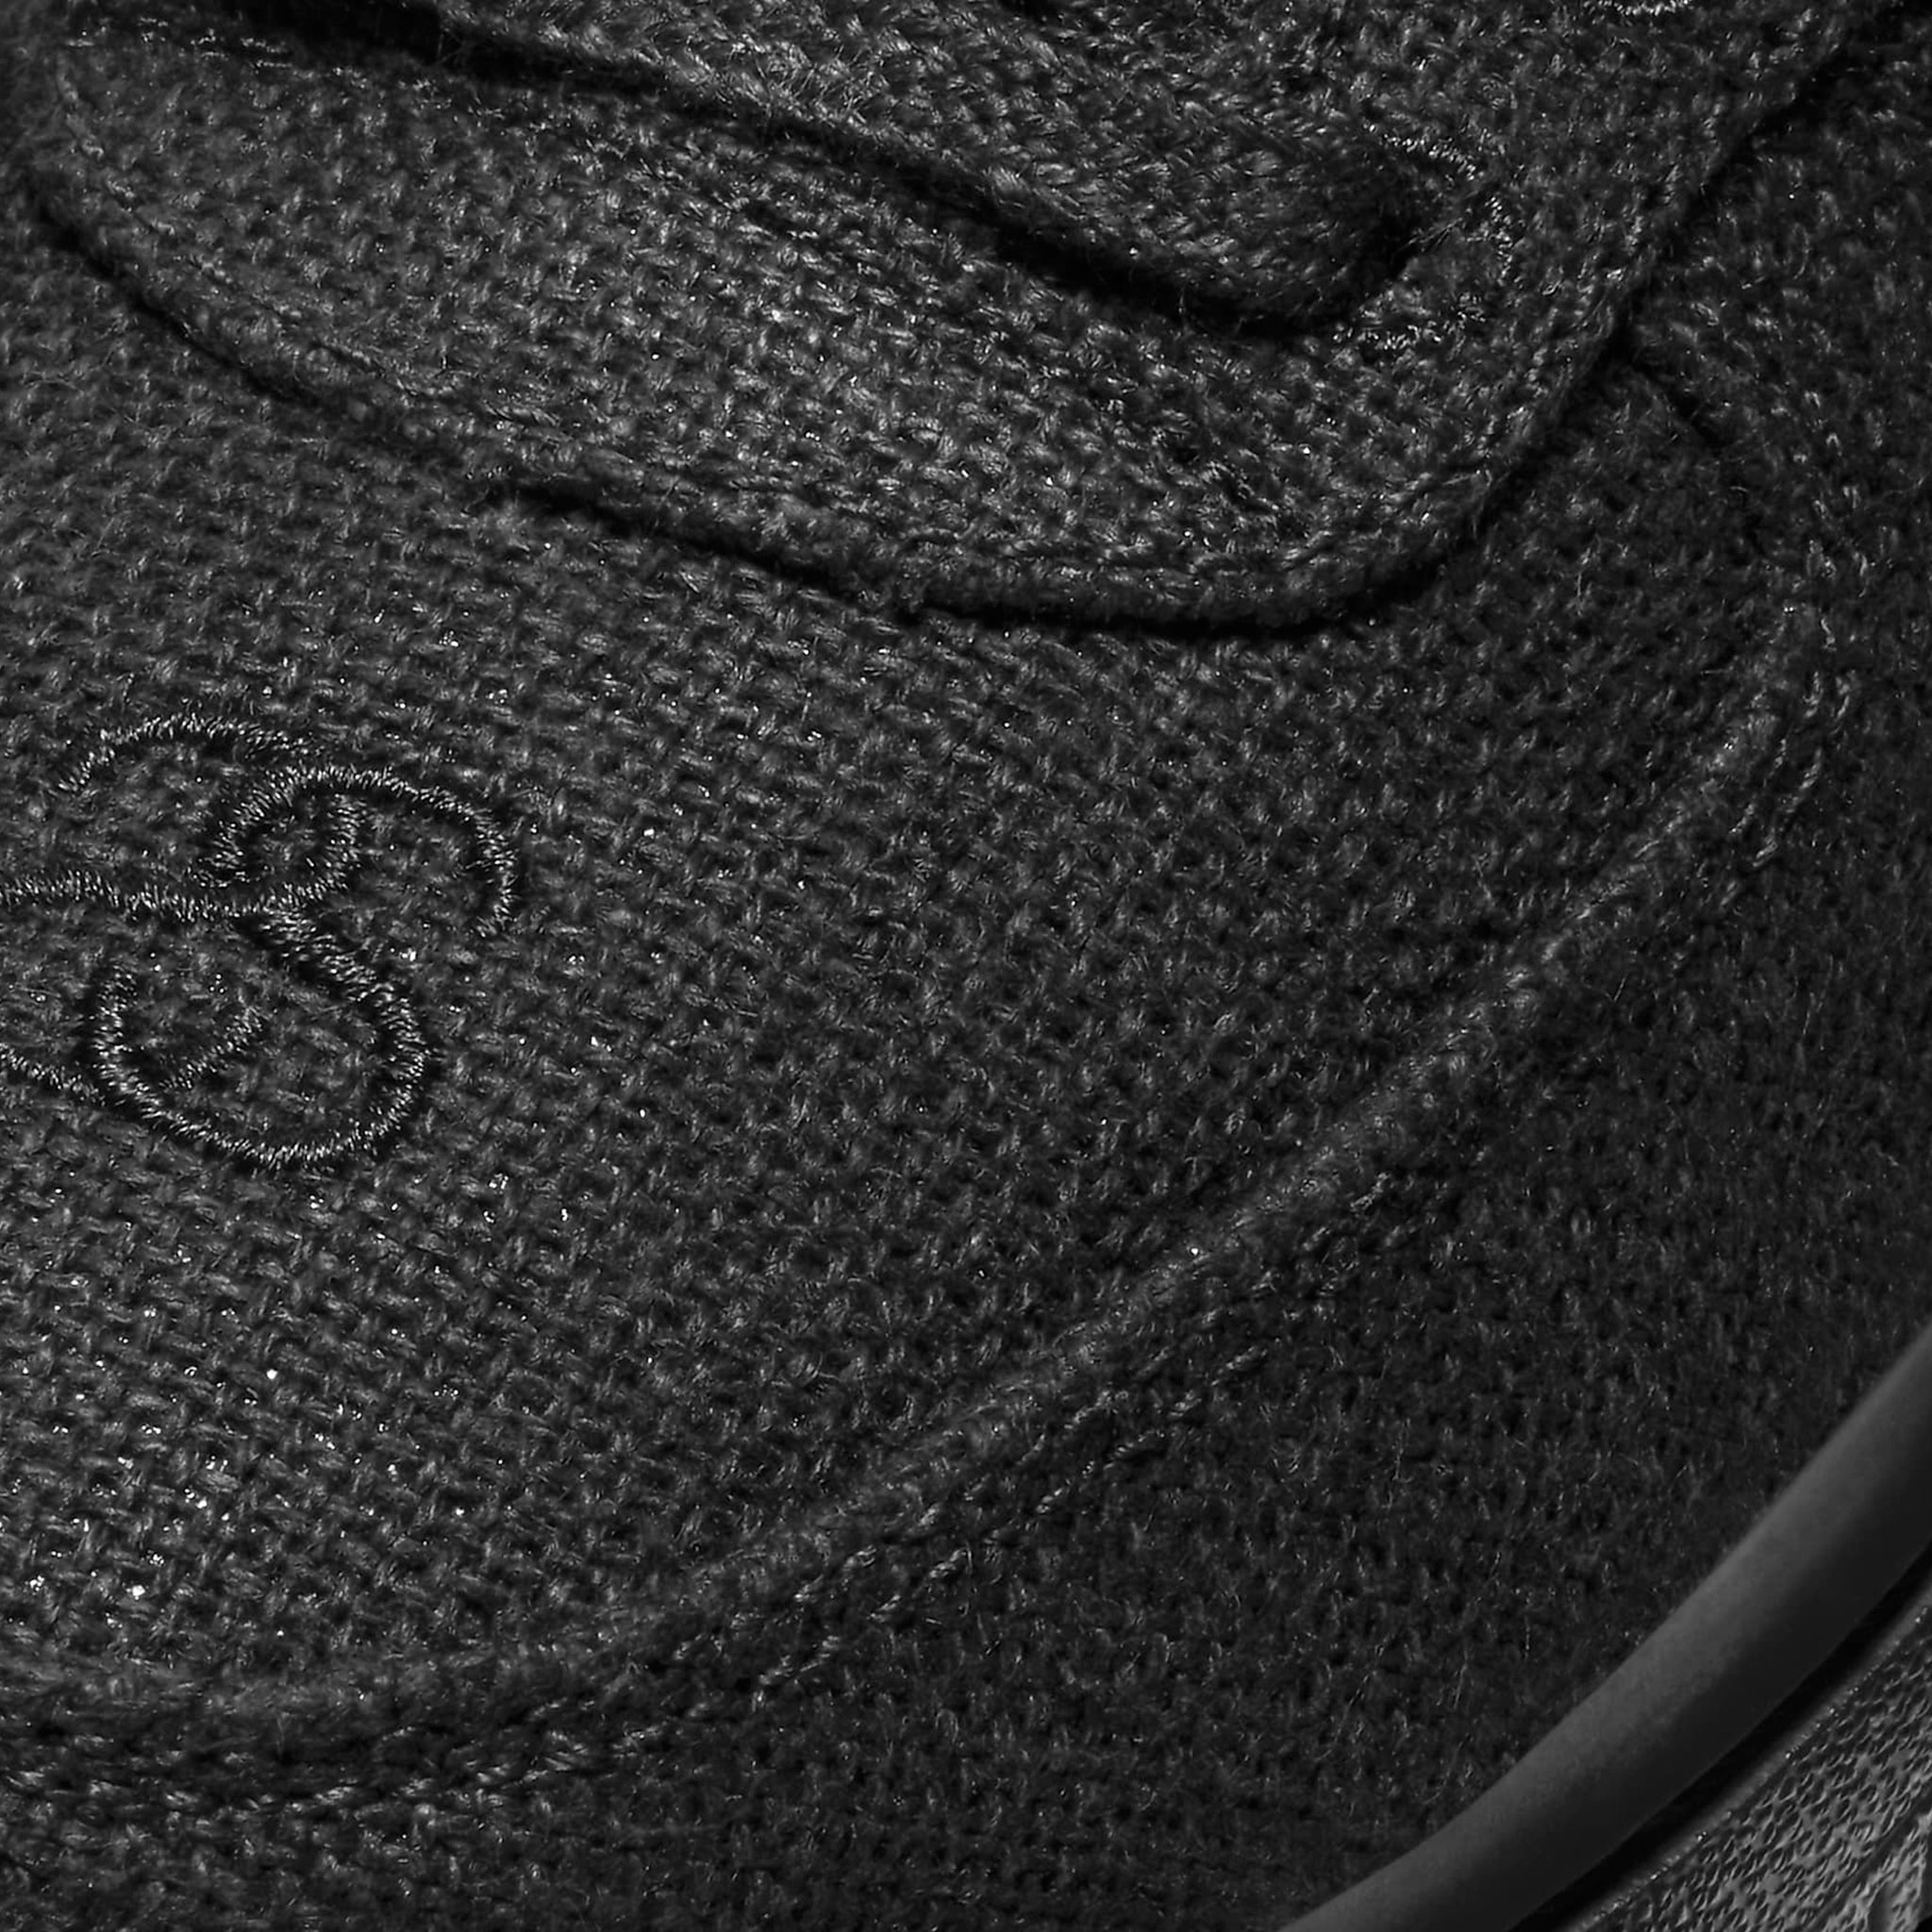 Toe view of Stussy x Nike Air Force 1 Low Black (PS) DD1578-001